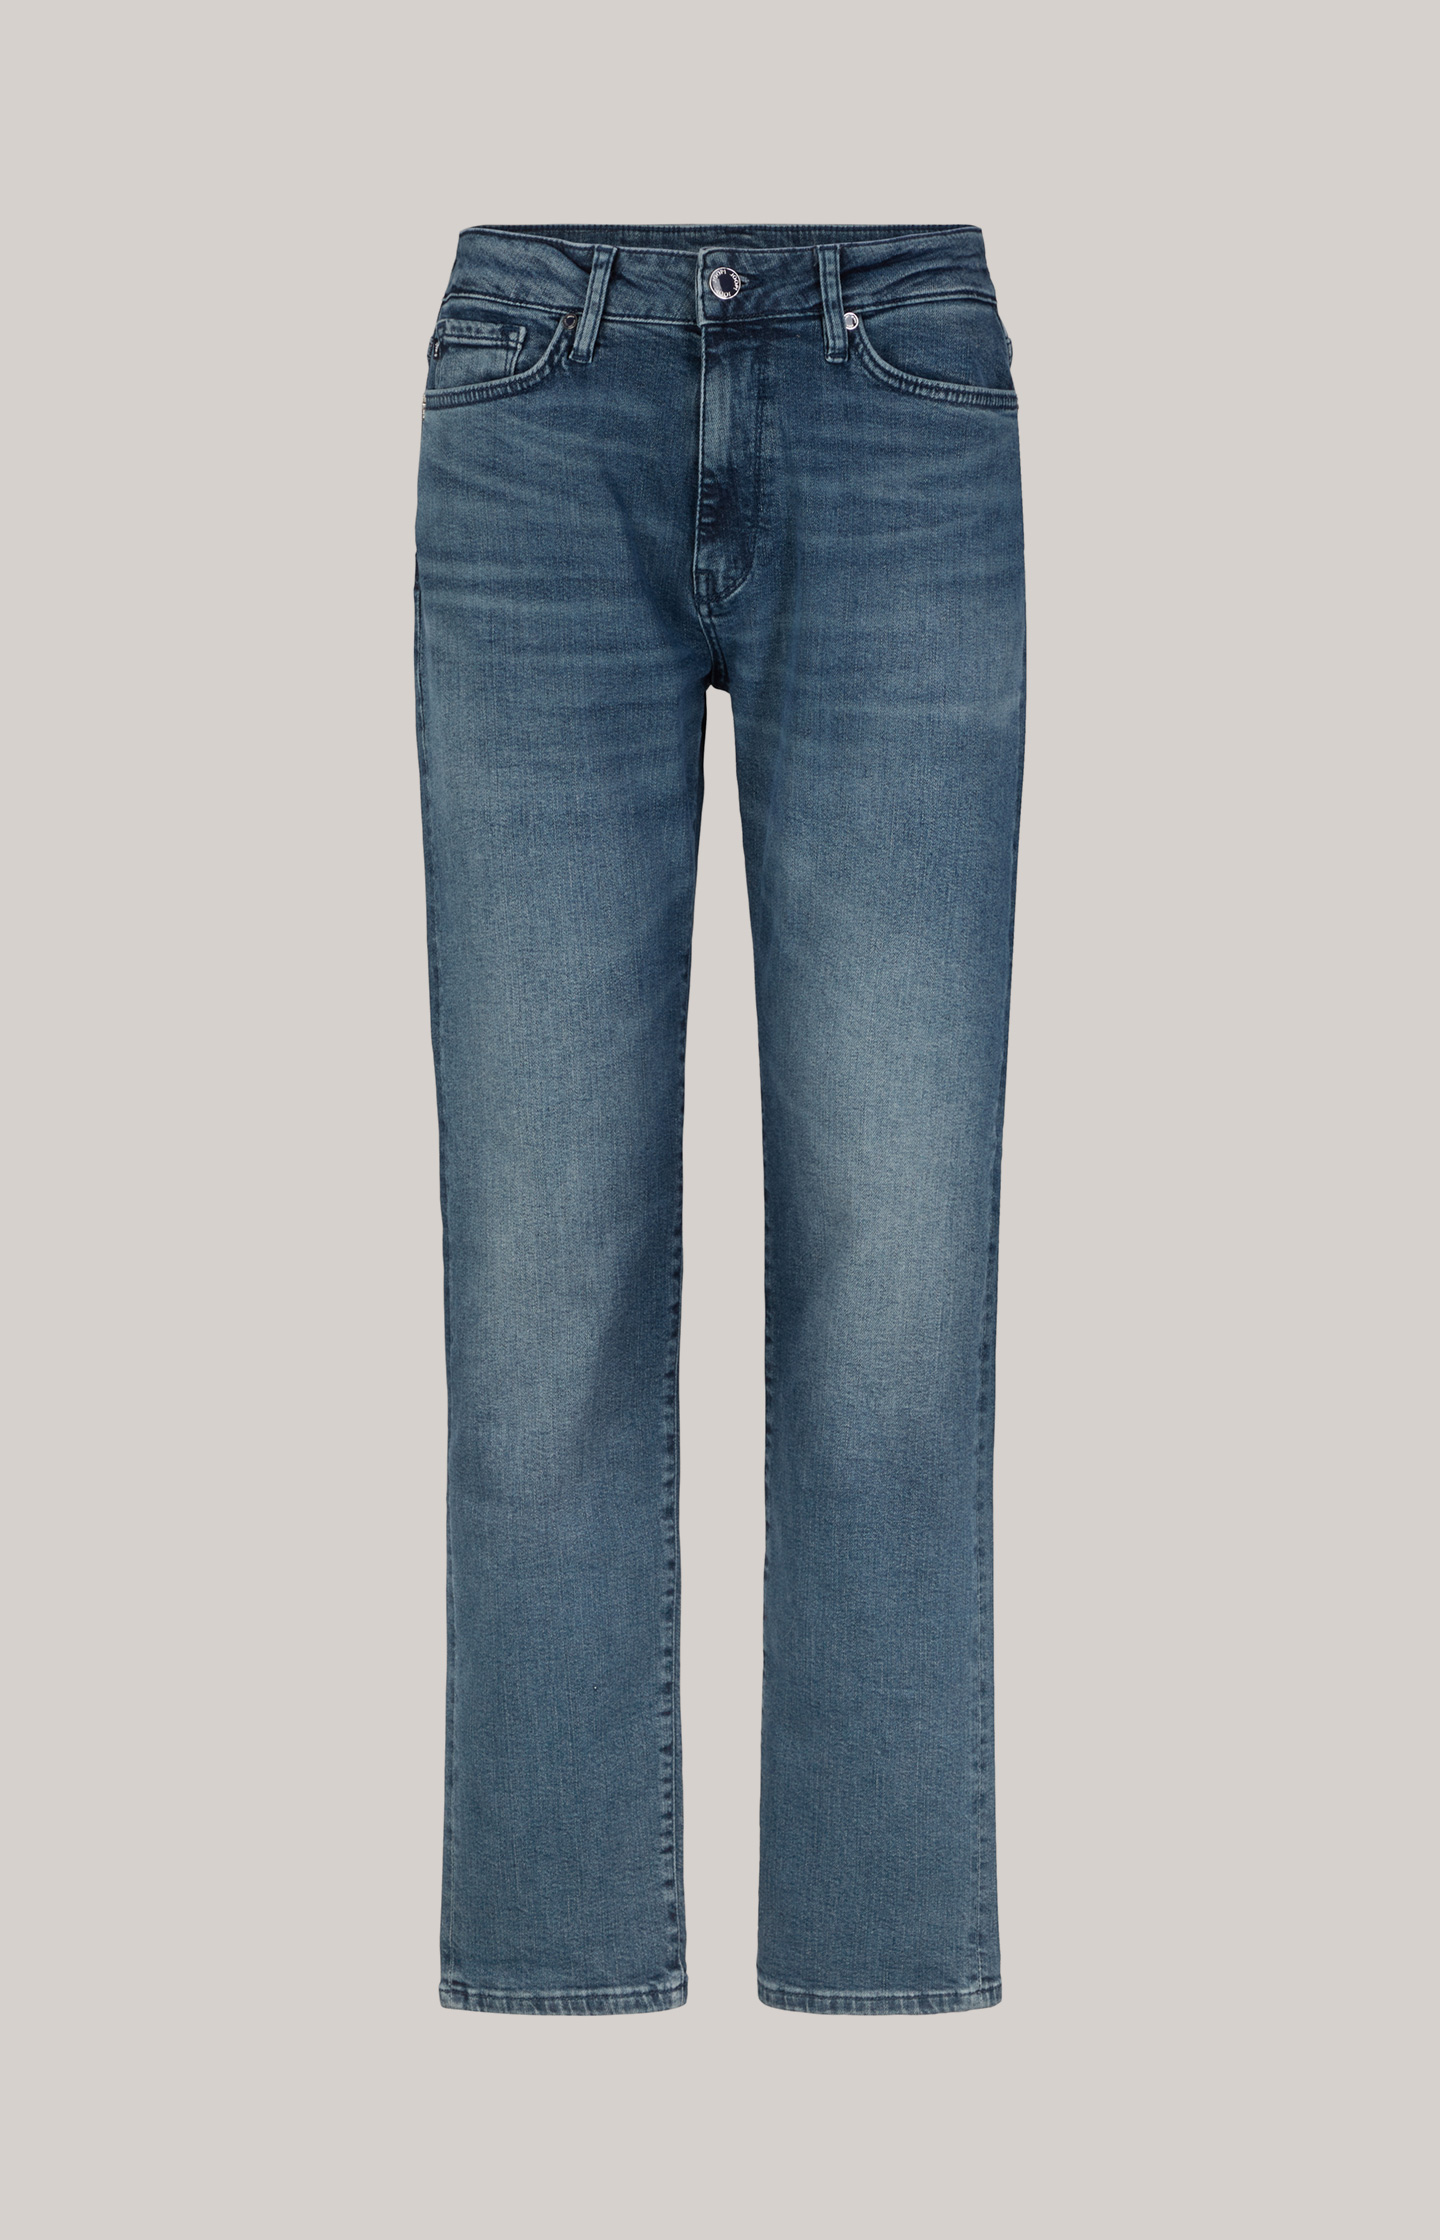 in in Shop Look Jeans Blue - Denim Online a Washed the JOOP!